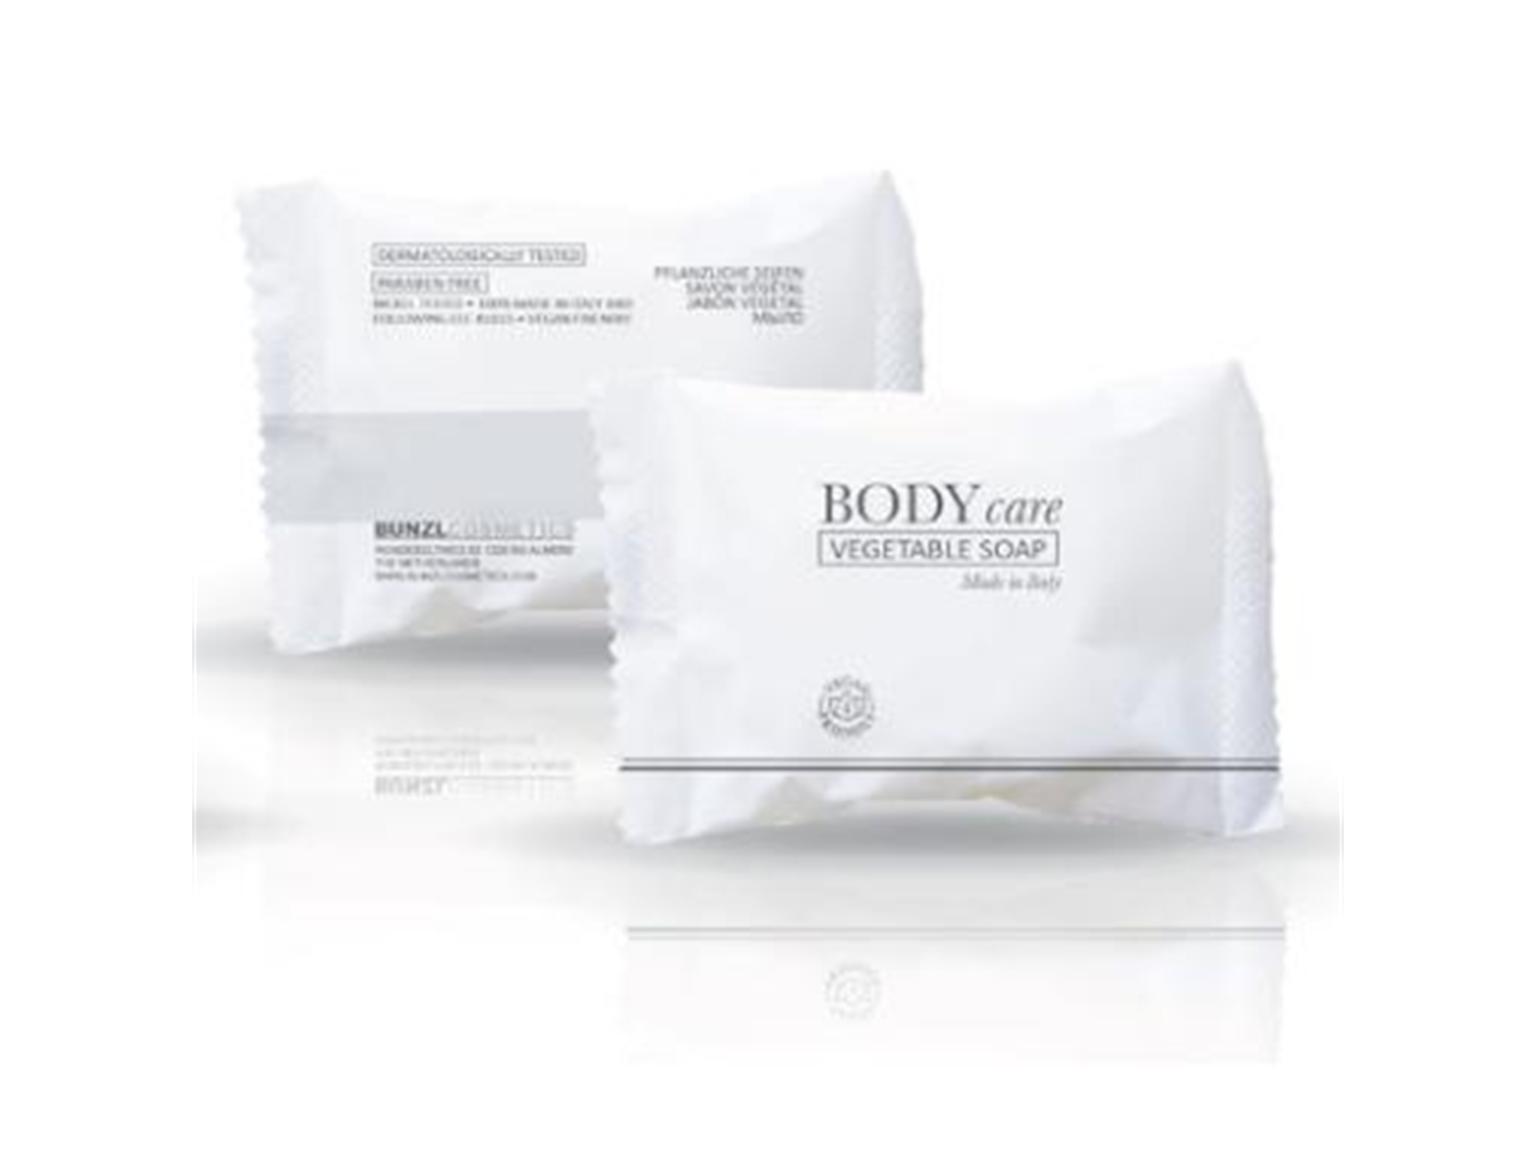 BODY CARE SEIFE  20 g, Body Care Collection